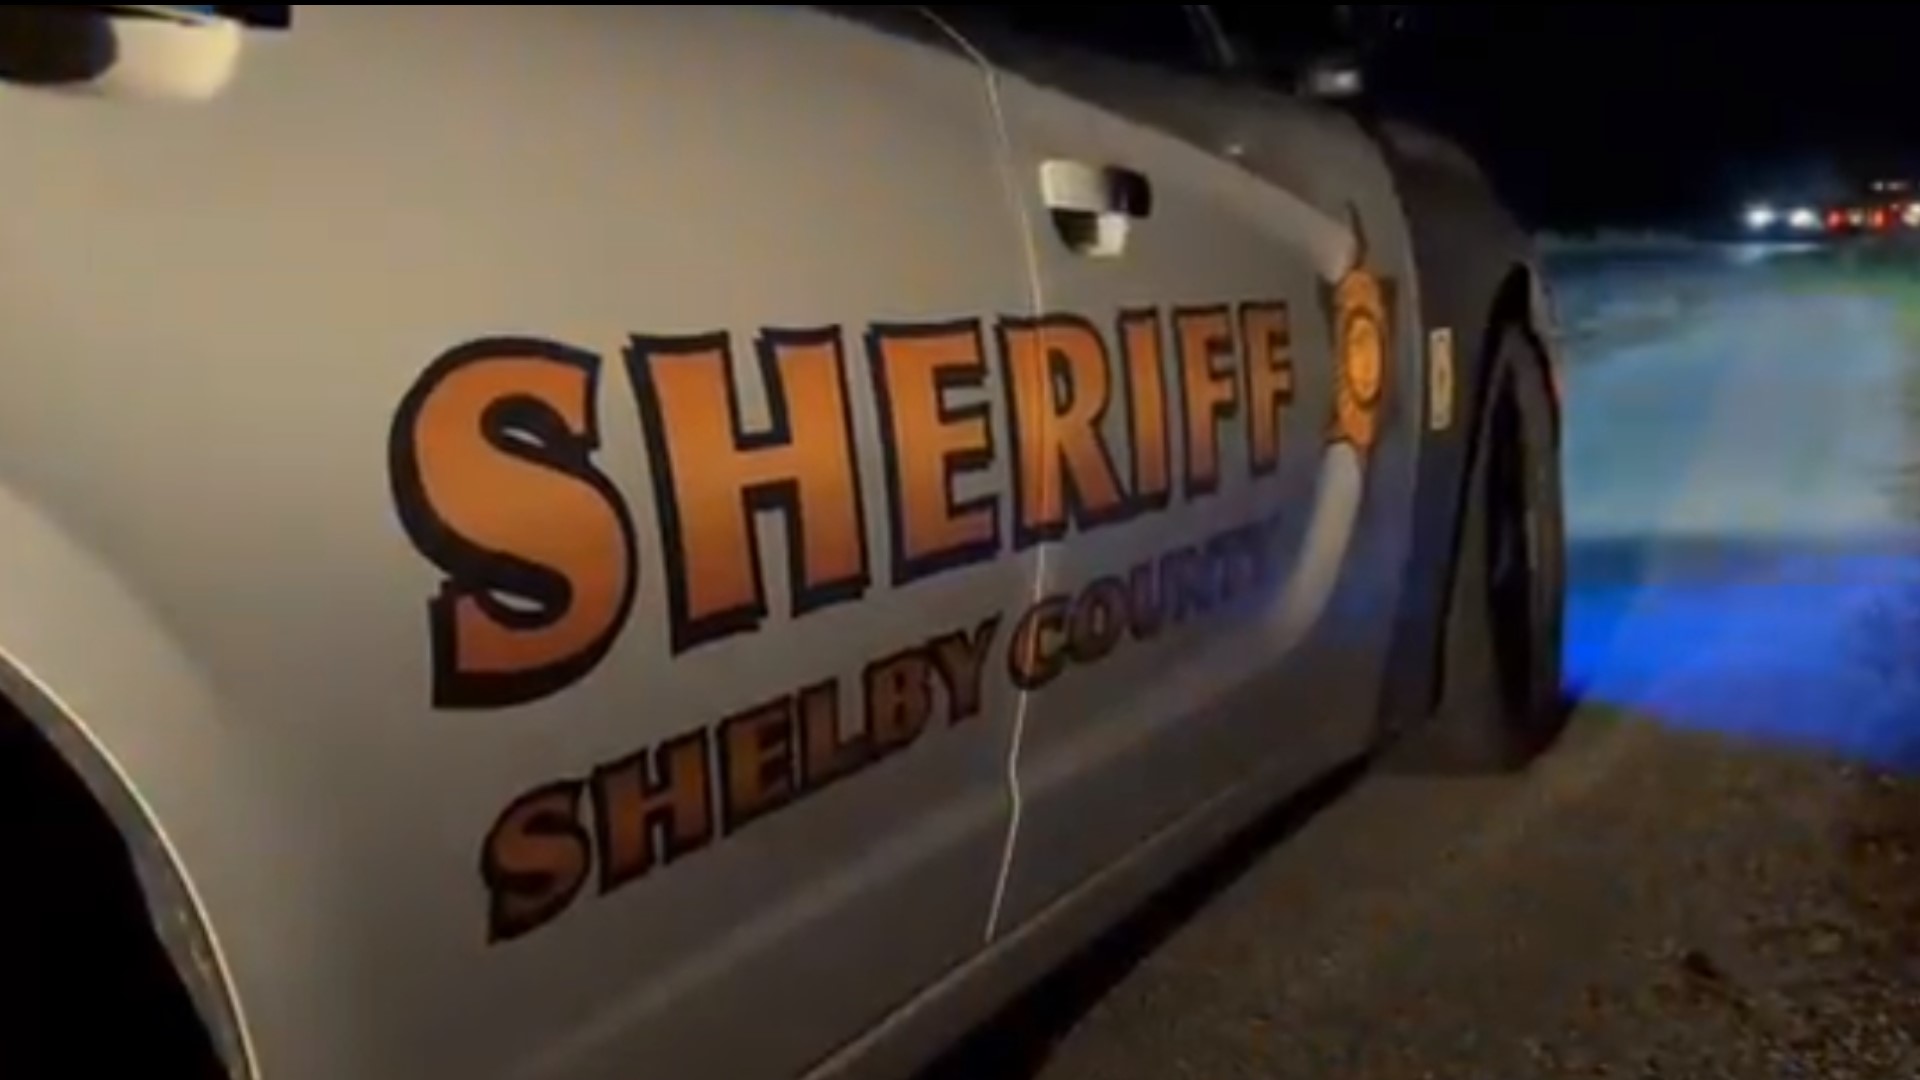 One person is dead, and four others are in the hospital after a crash involving one vehicle took place in North Shelby County, according to the Shelby County Sheriff